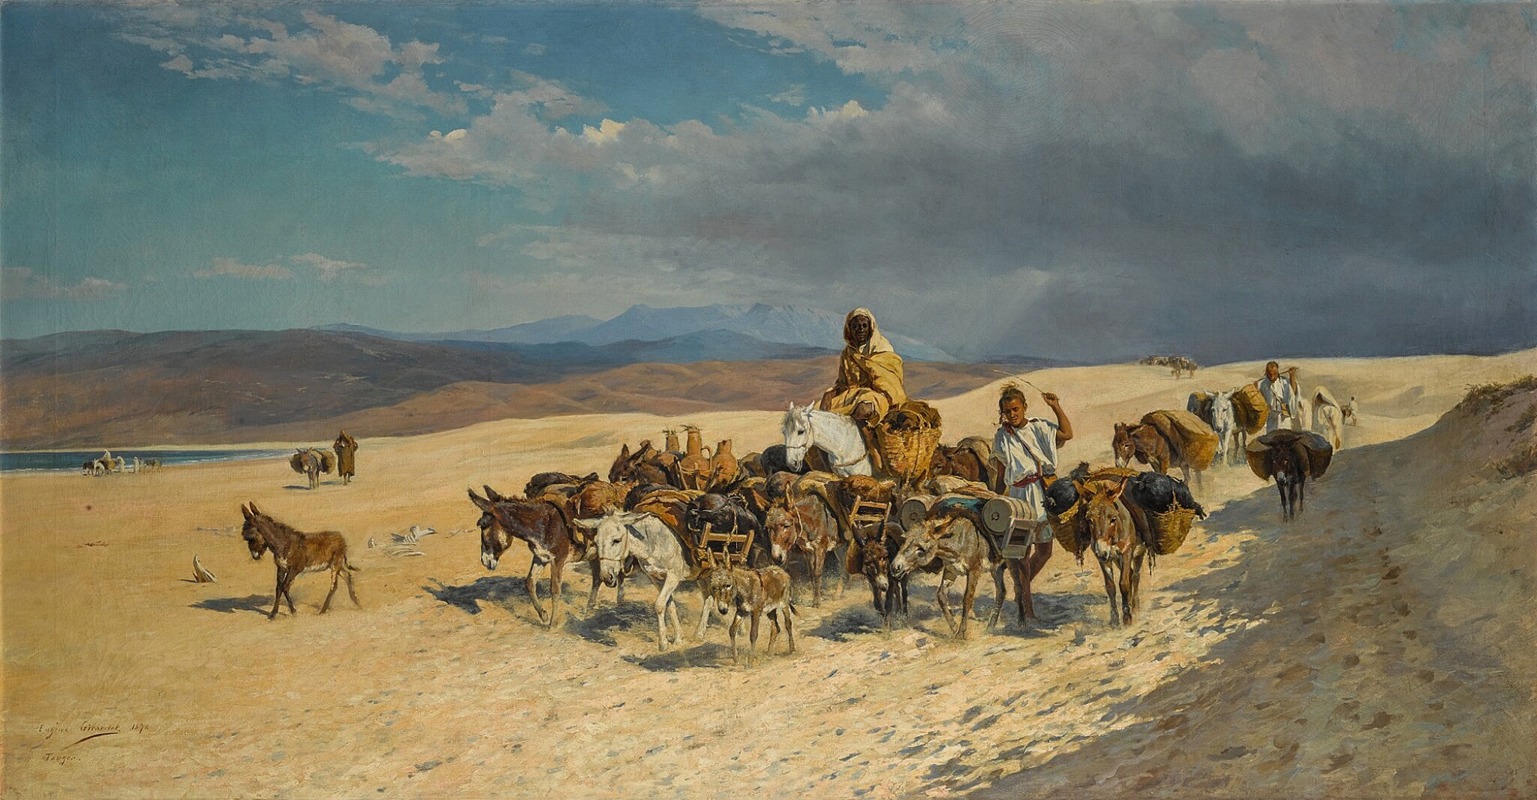 Eugène Girardet - The Water Carriers, Tangier